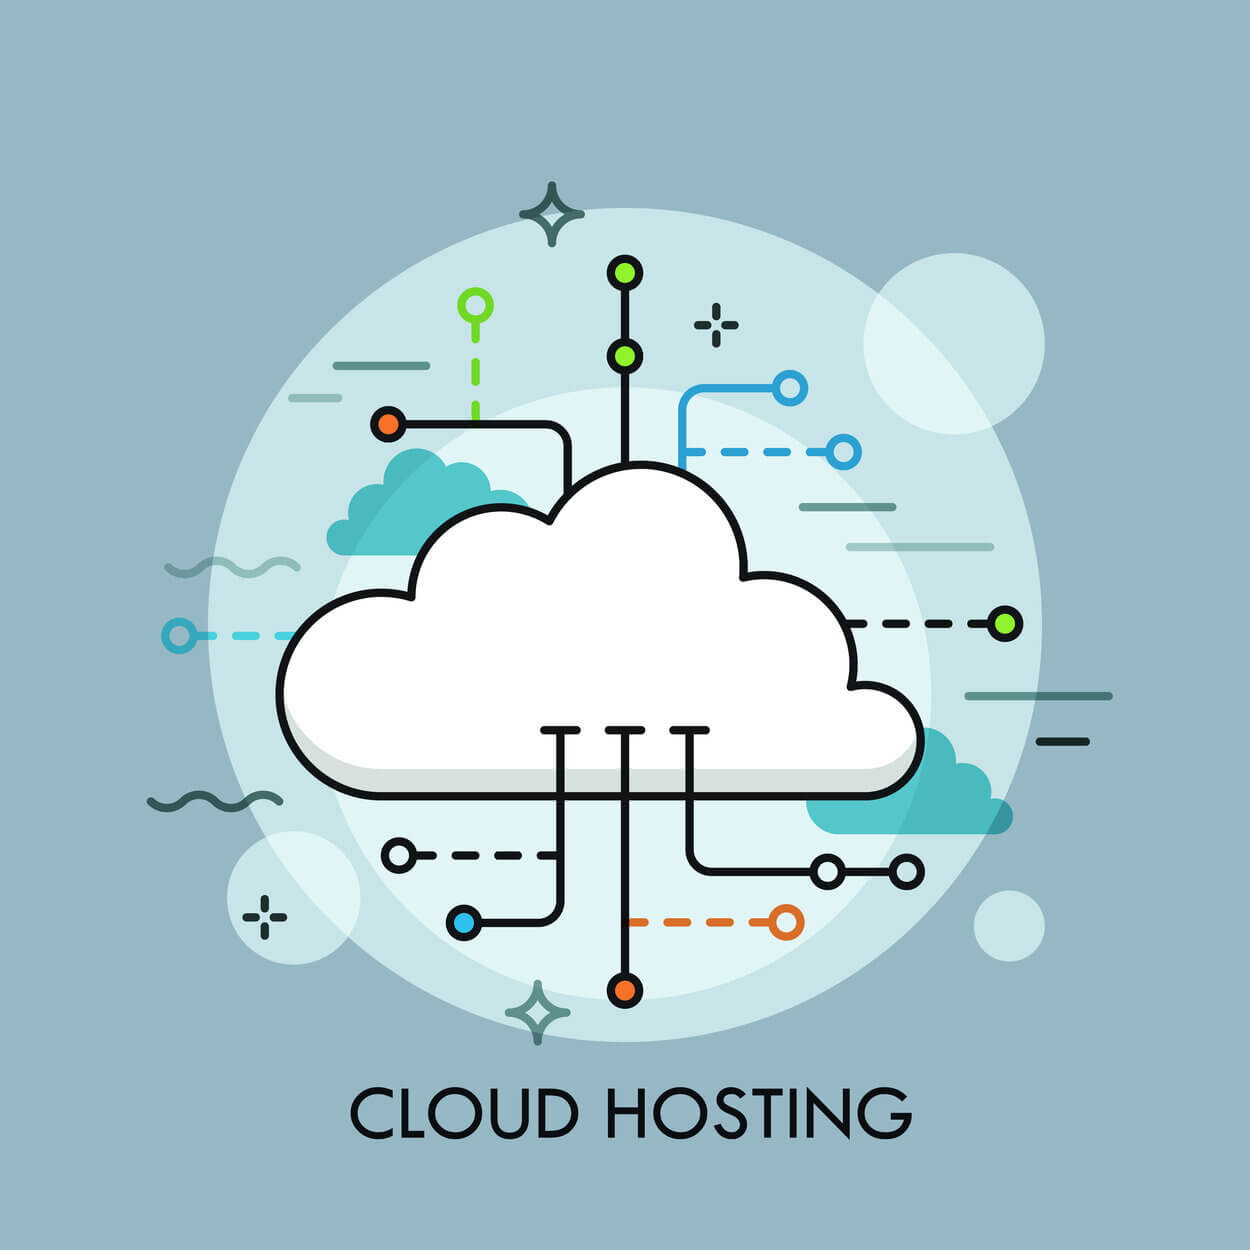 Cloud Hosting Overview